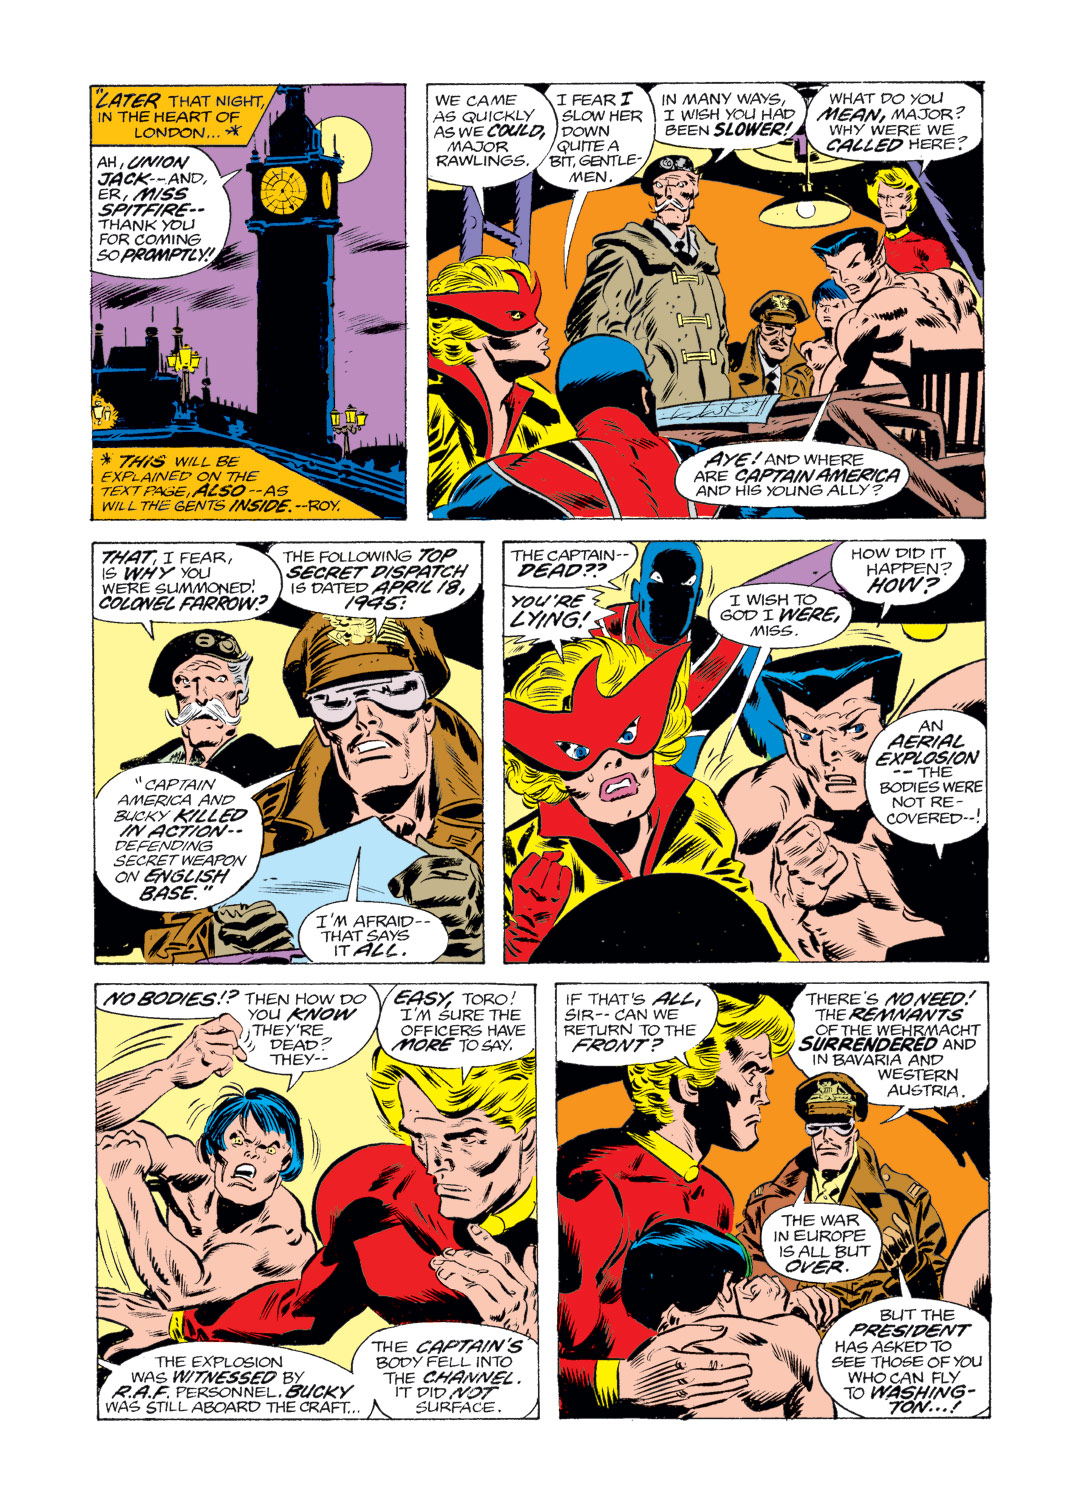 What If? (1977) issue 4 - The Invaders had stayed together after World War Two - Page 10